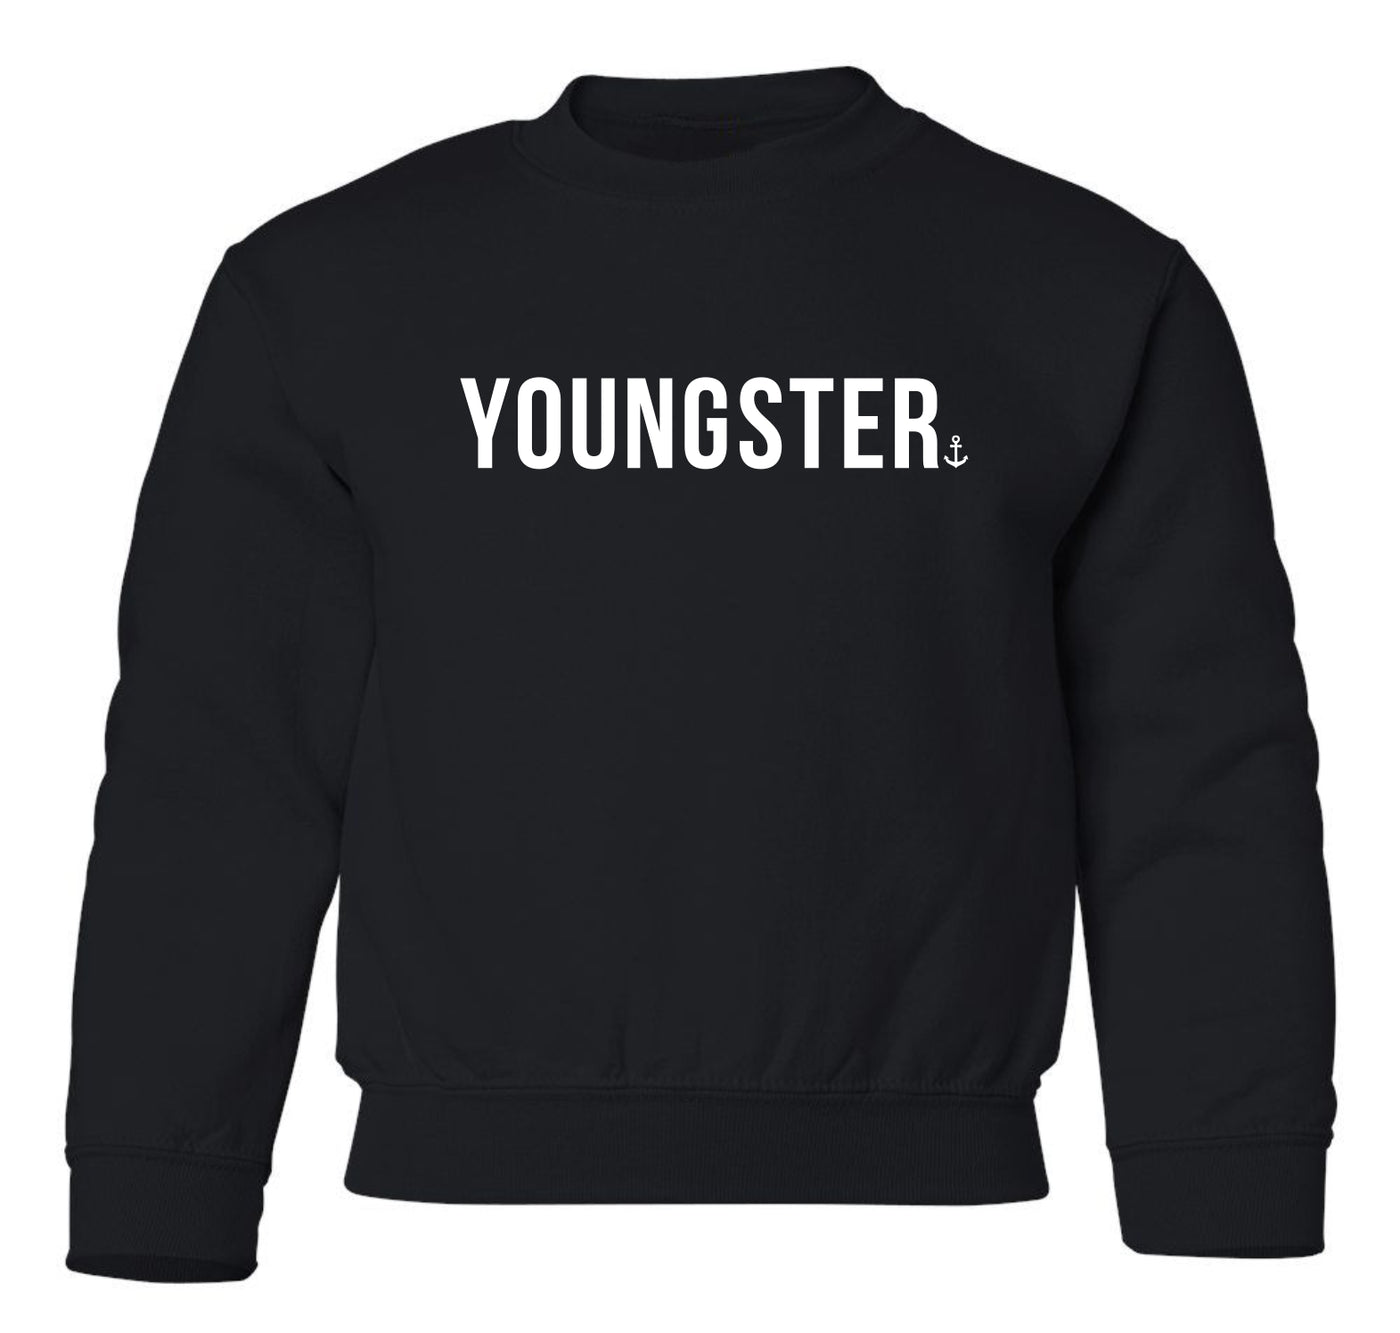 "Youngster" Toddler/Youth Crewneck Sweatshirt